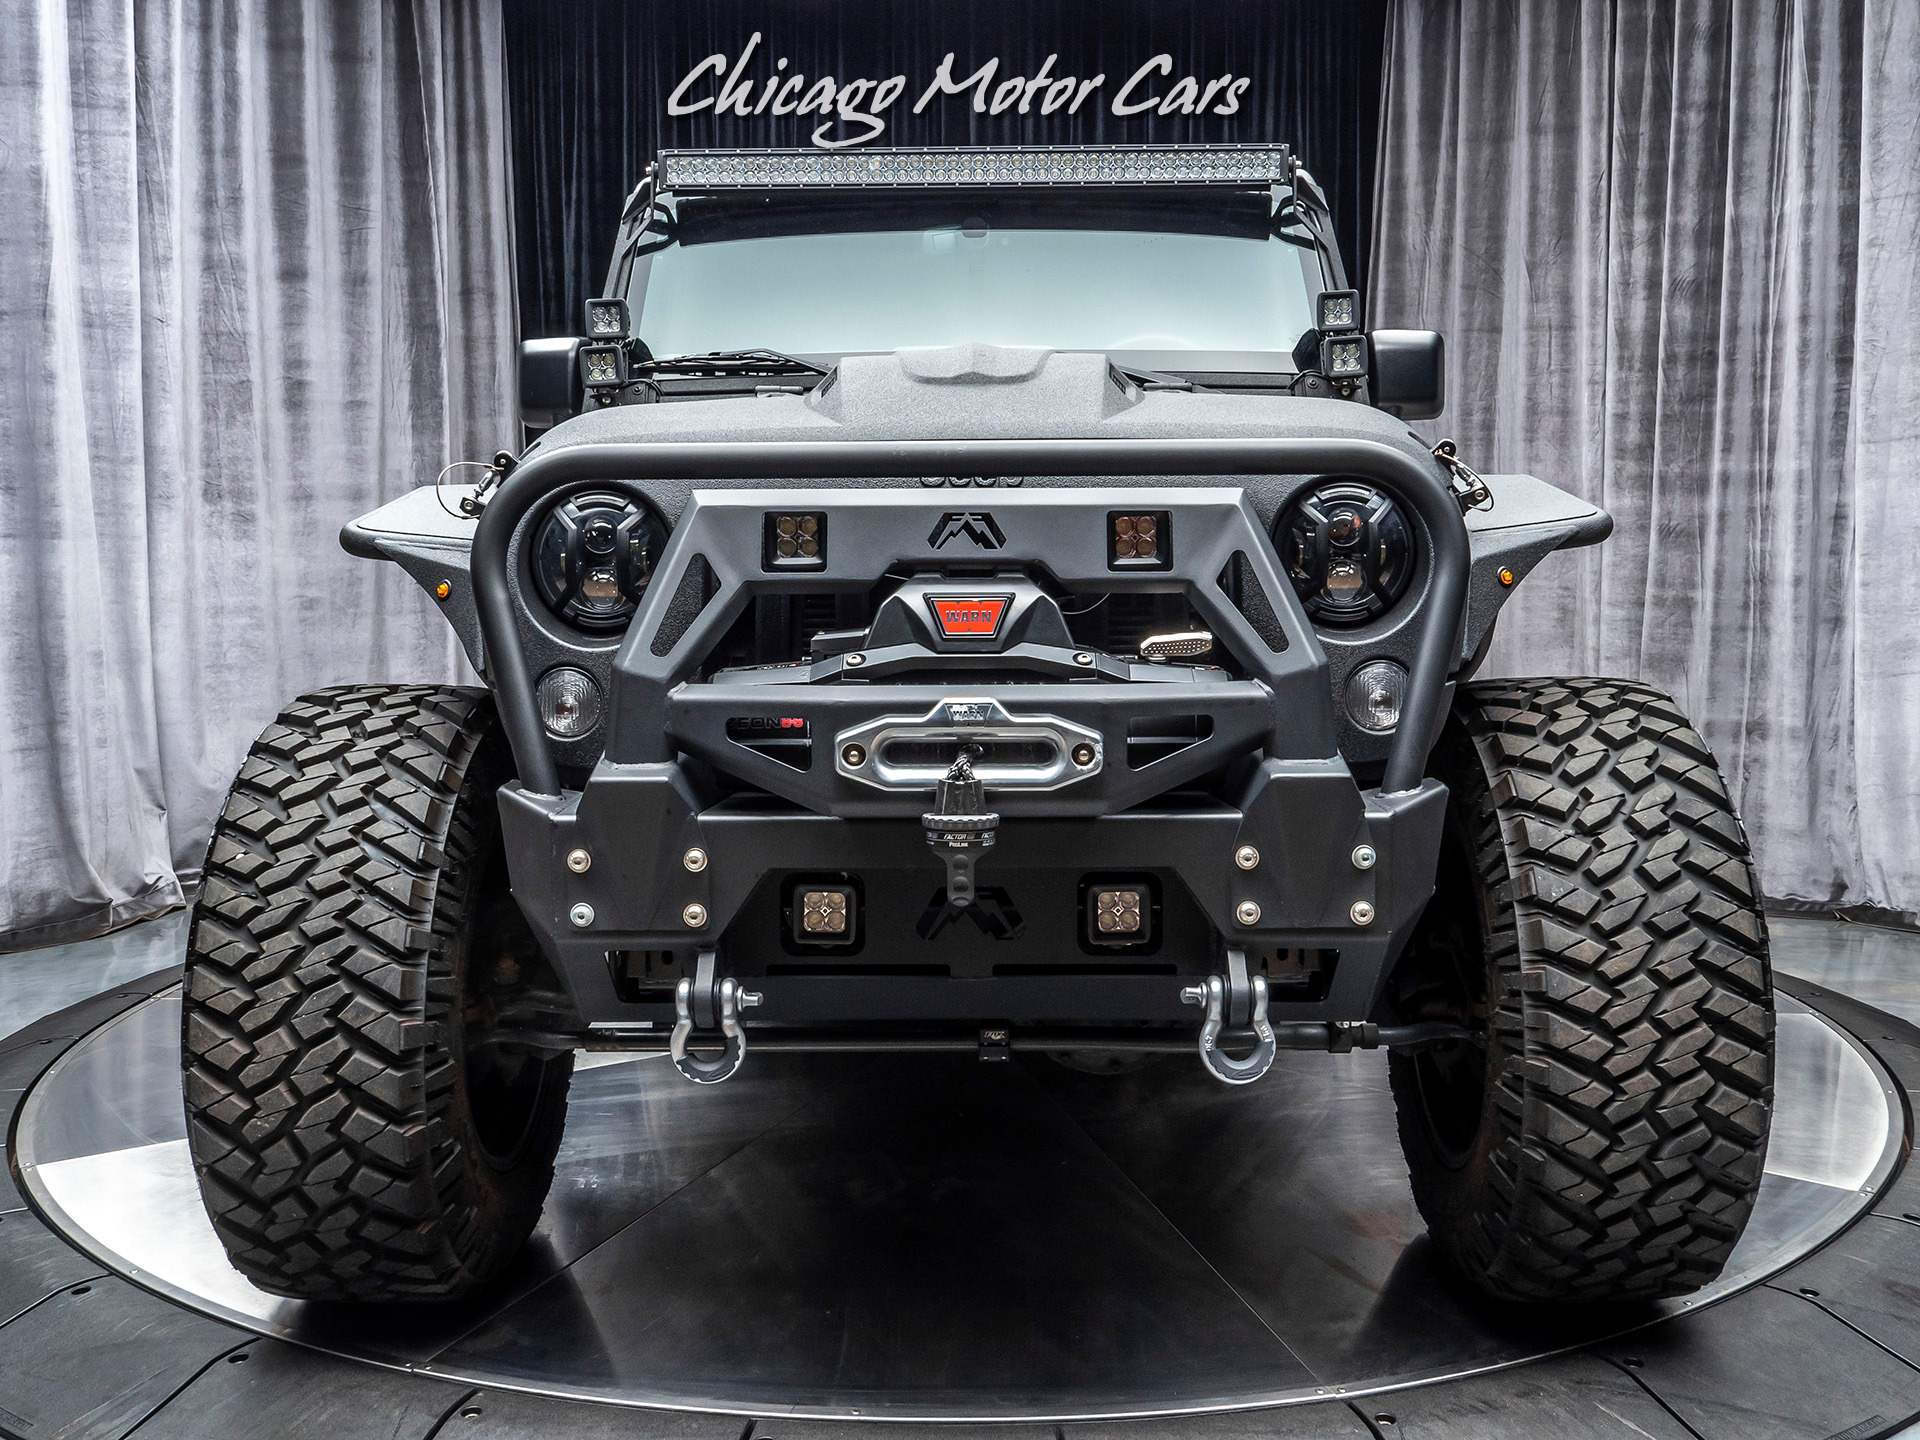 Used 2017 Jeep Wrangler Unlimited **FULLY UPGRADED** $90K+ BUILD! For Sale  (Special Pricing) | Chicago Motor Cars Stock #16047